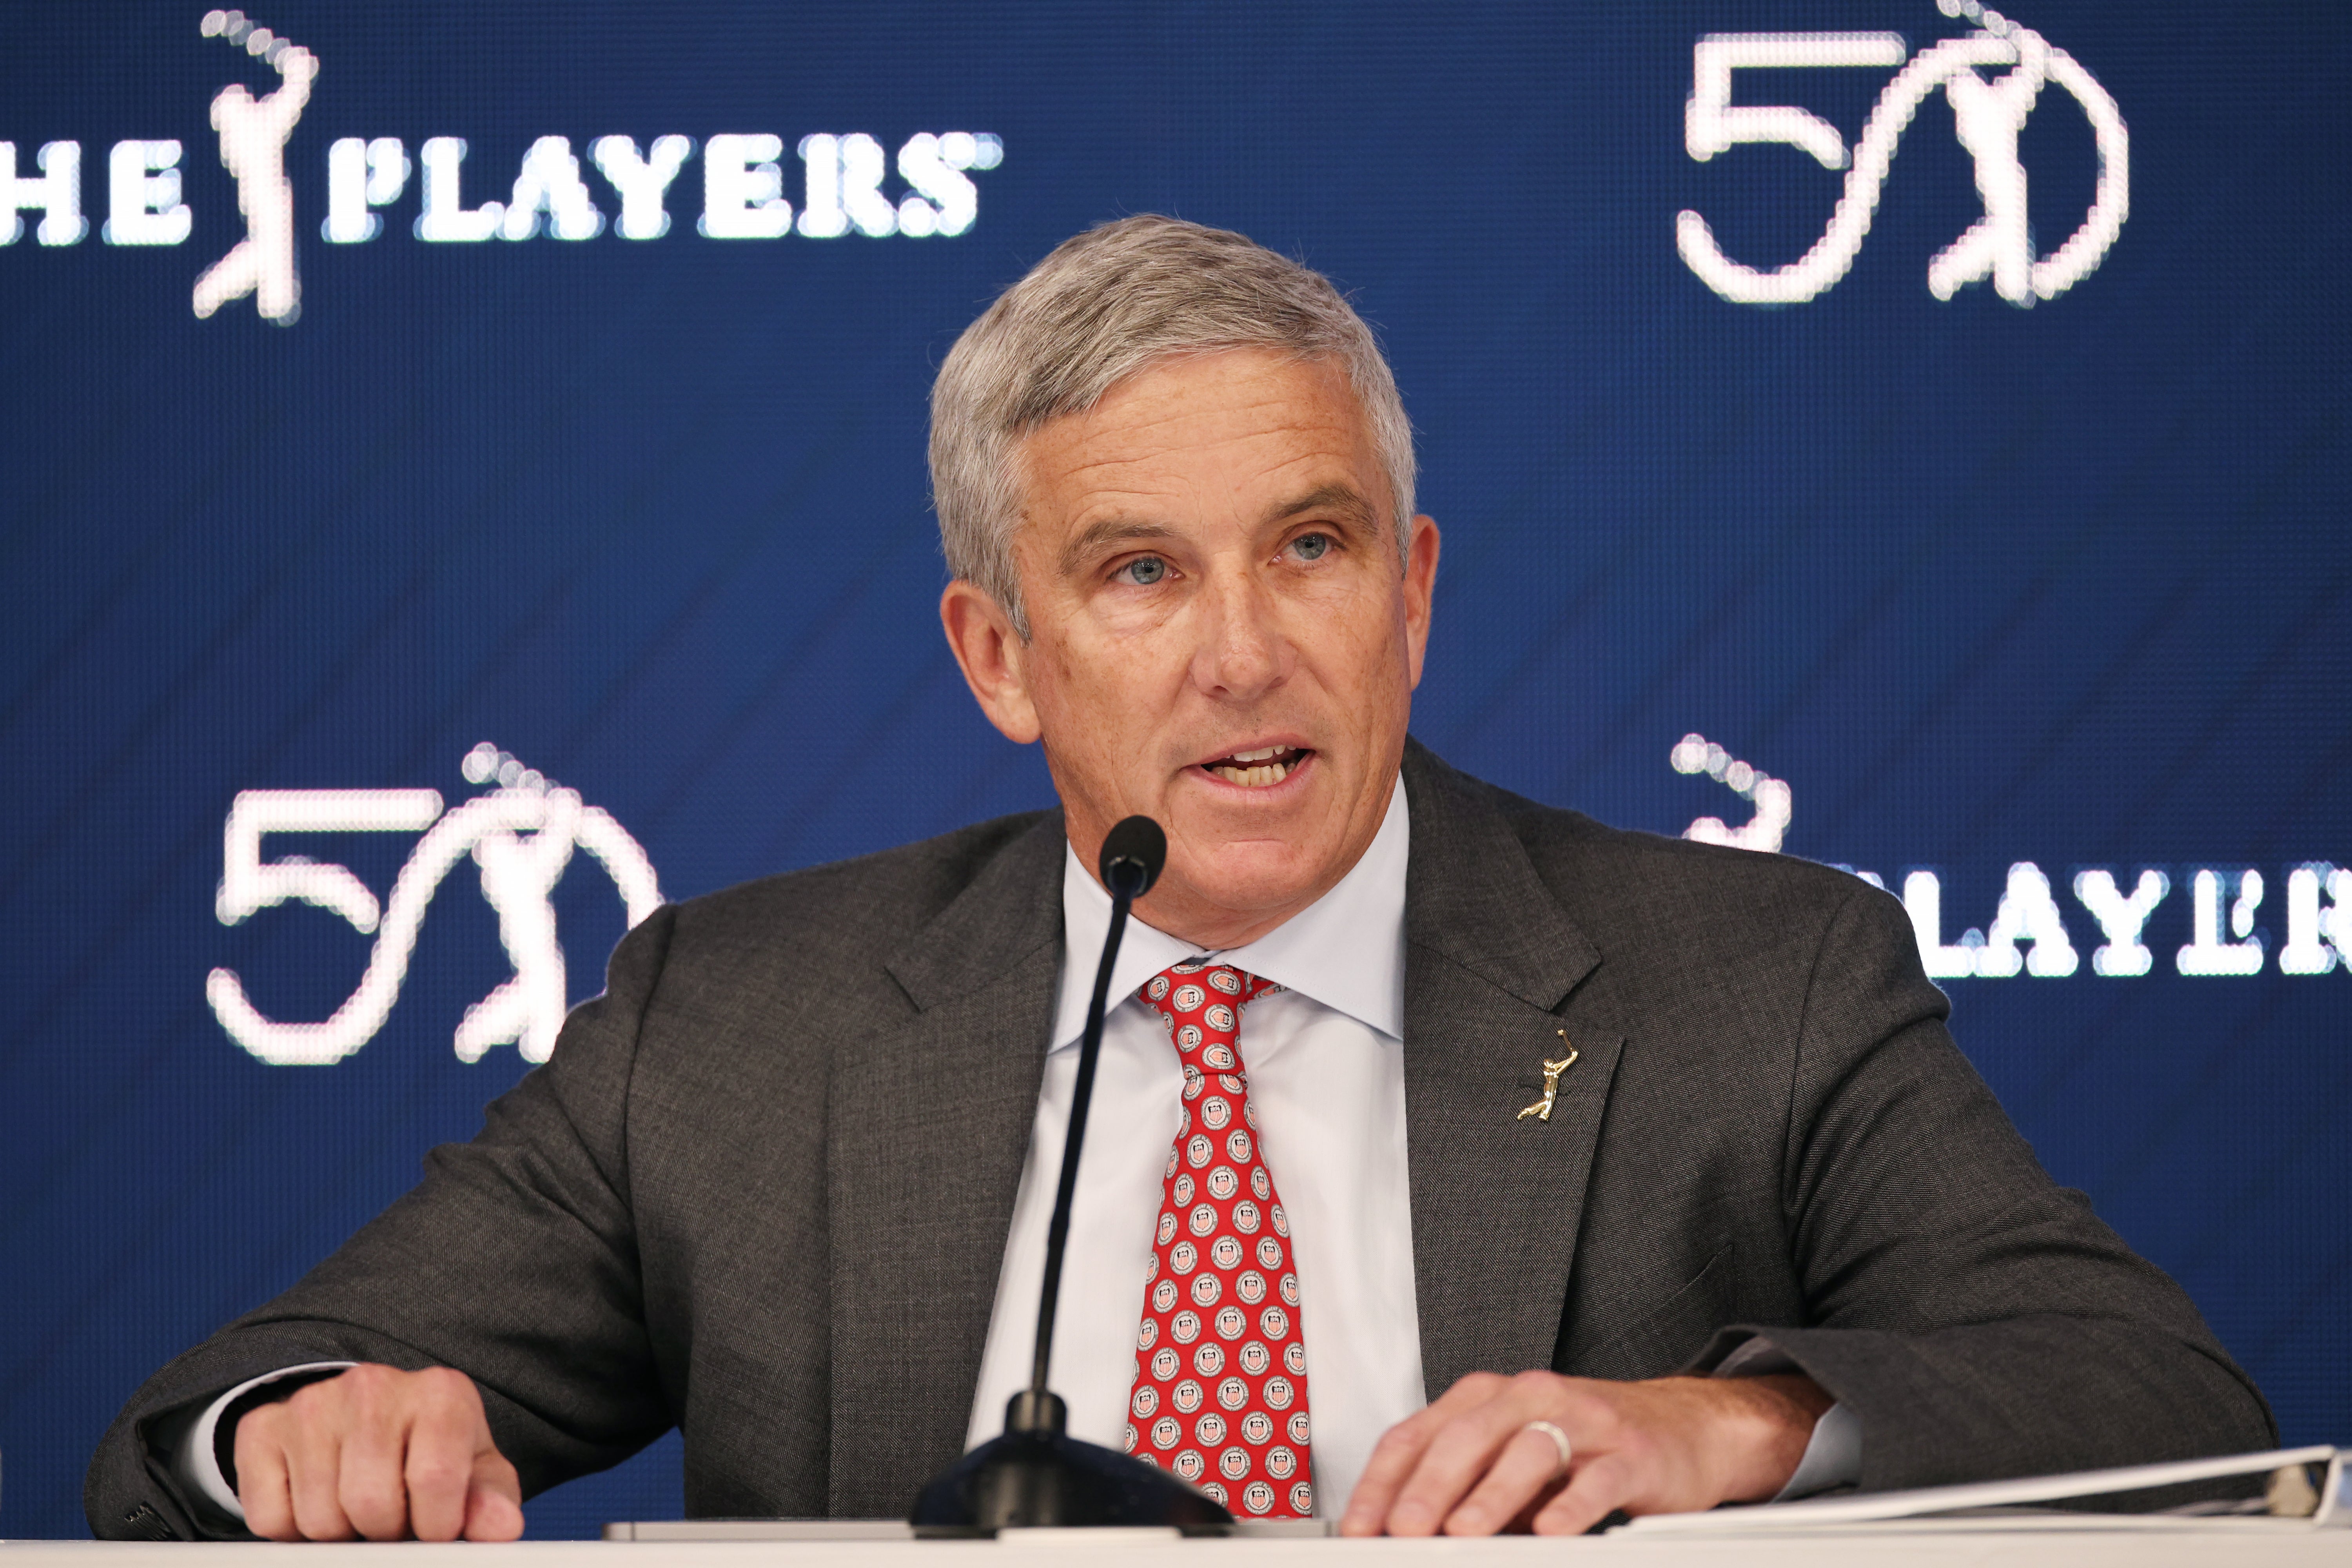 PGA Tour commissioner Jay Monahan wrote a letter to the players about a meeting